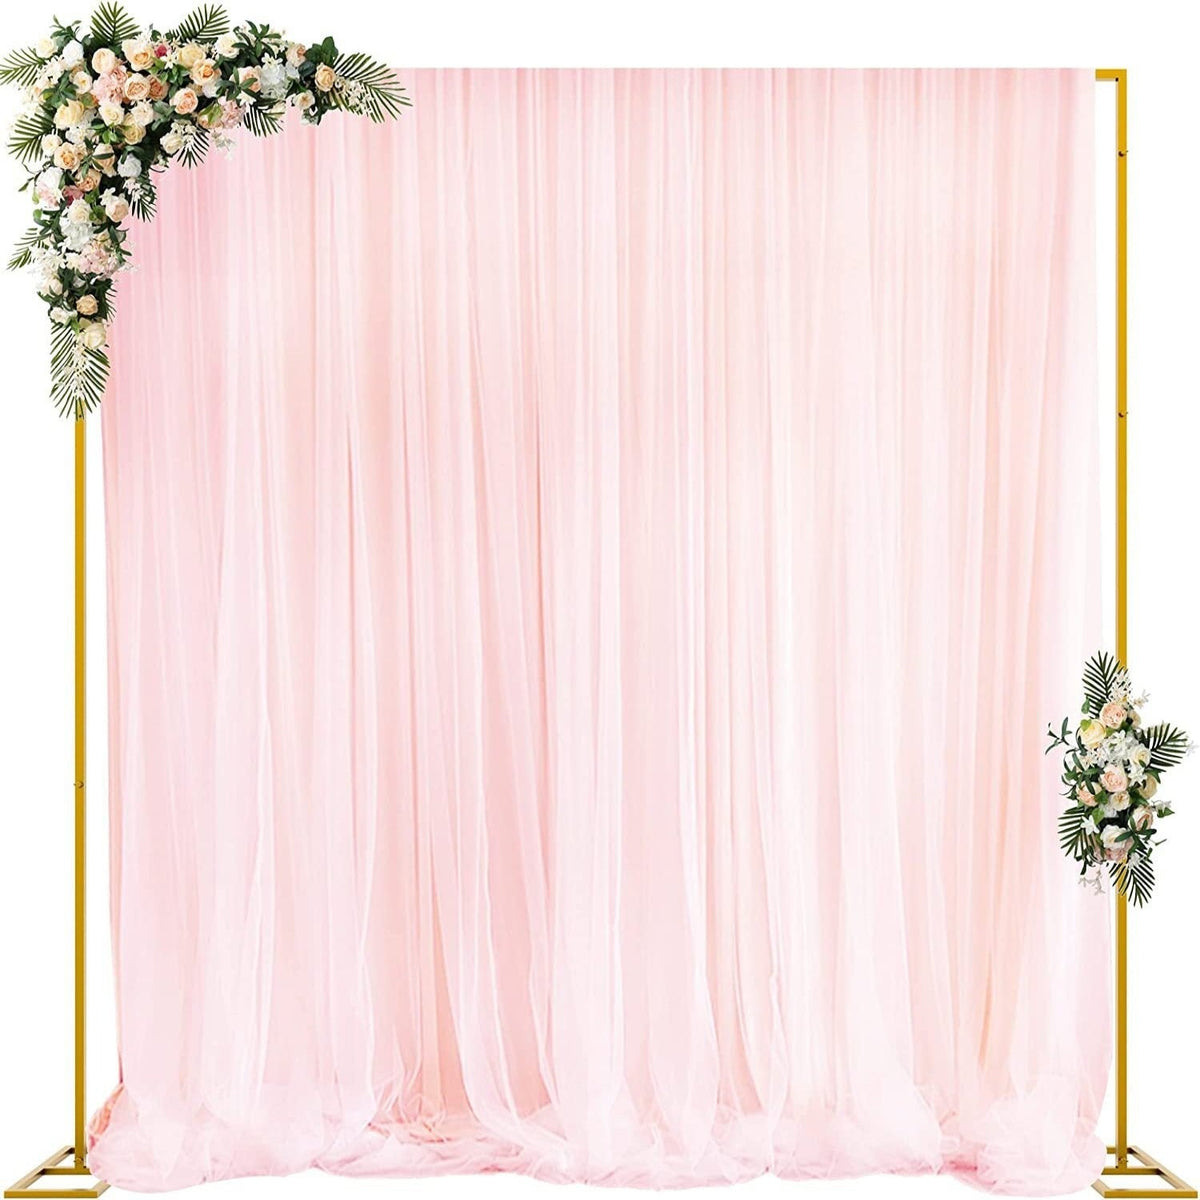 Flexible Iron Party Stand Flower Stand Wedding Arch Party Birthday Backdrop HJ9112